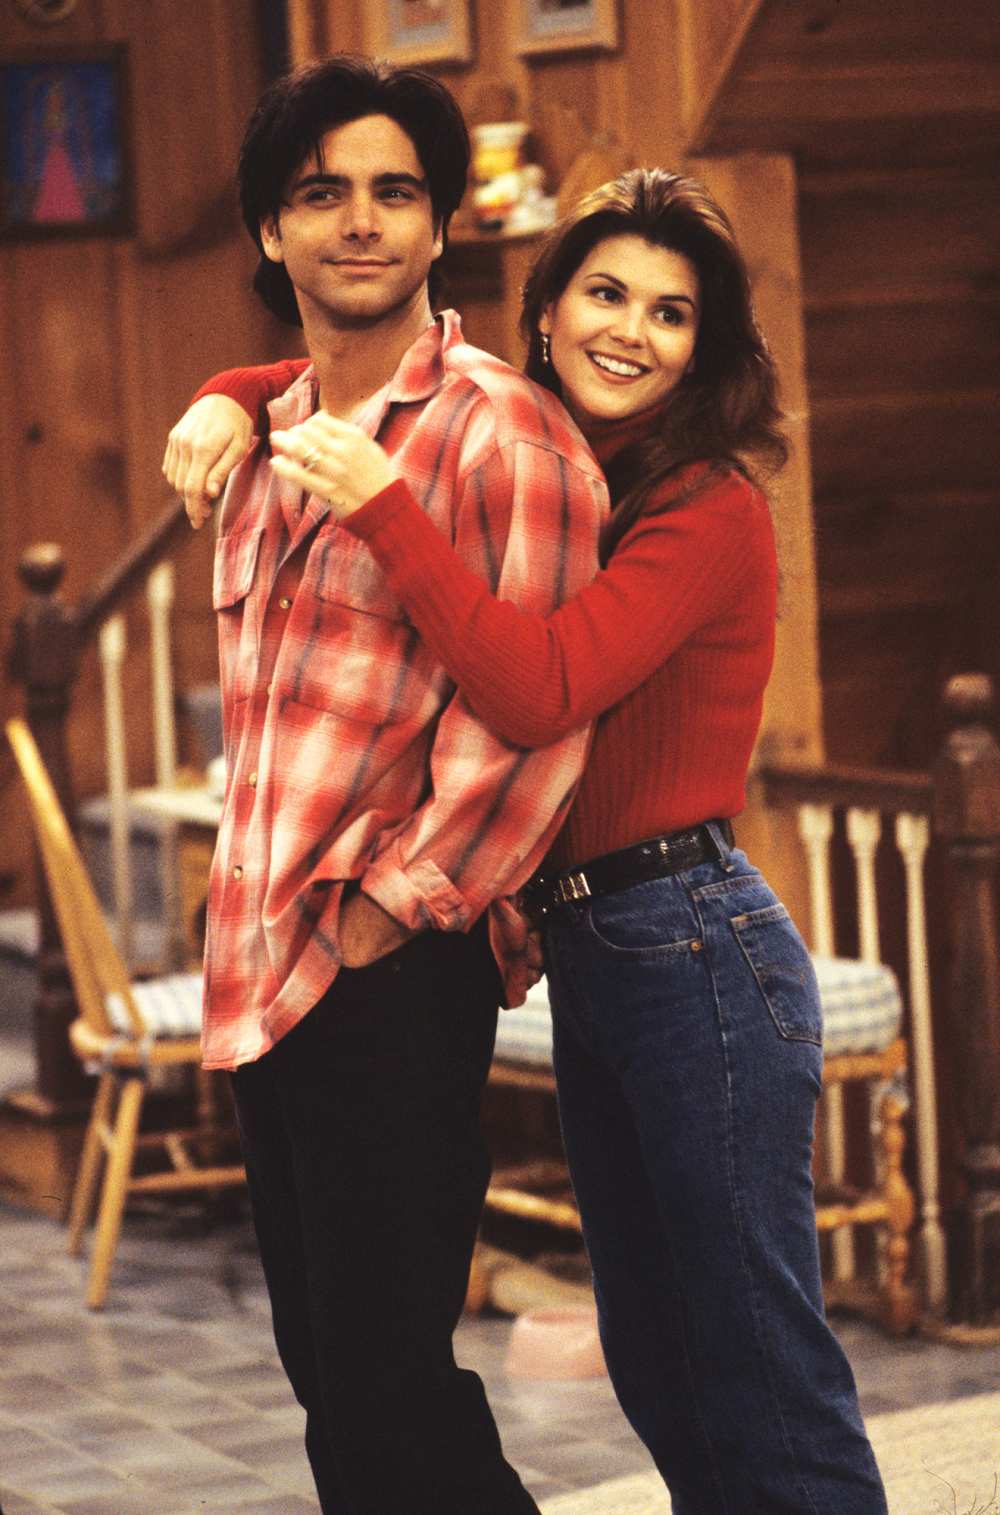 John Stamos Full house Lori Loughlin 25 Things You Don't Know About Me